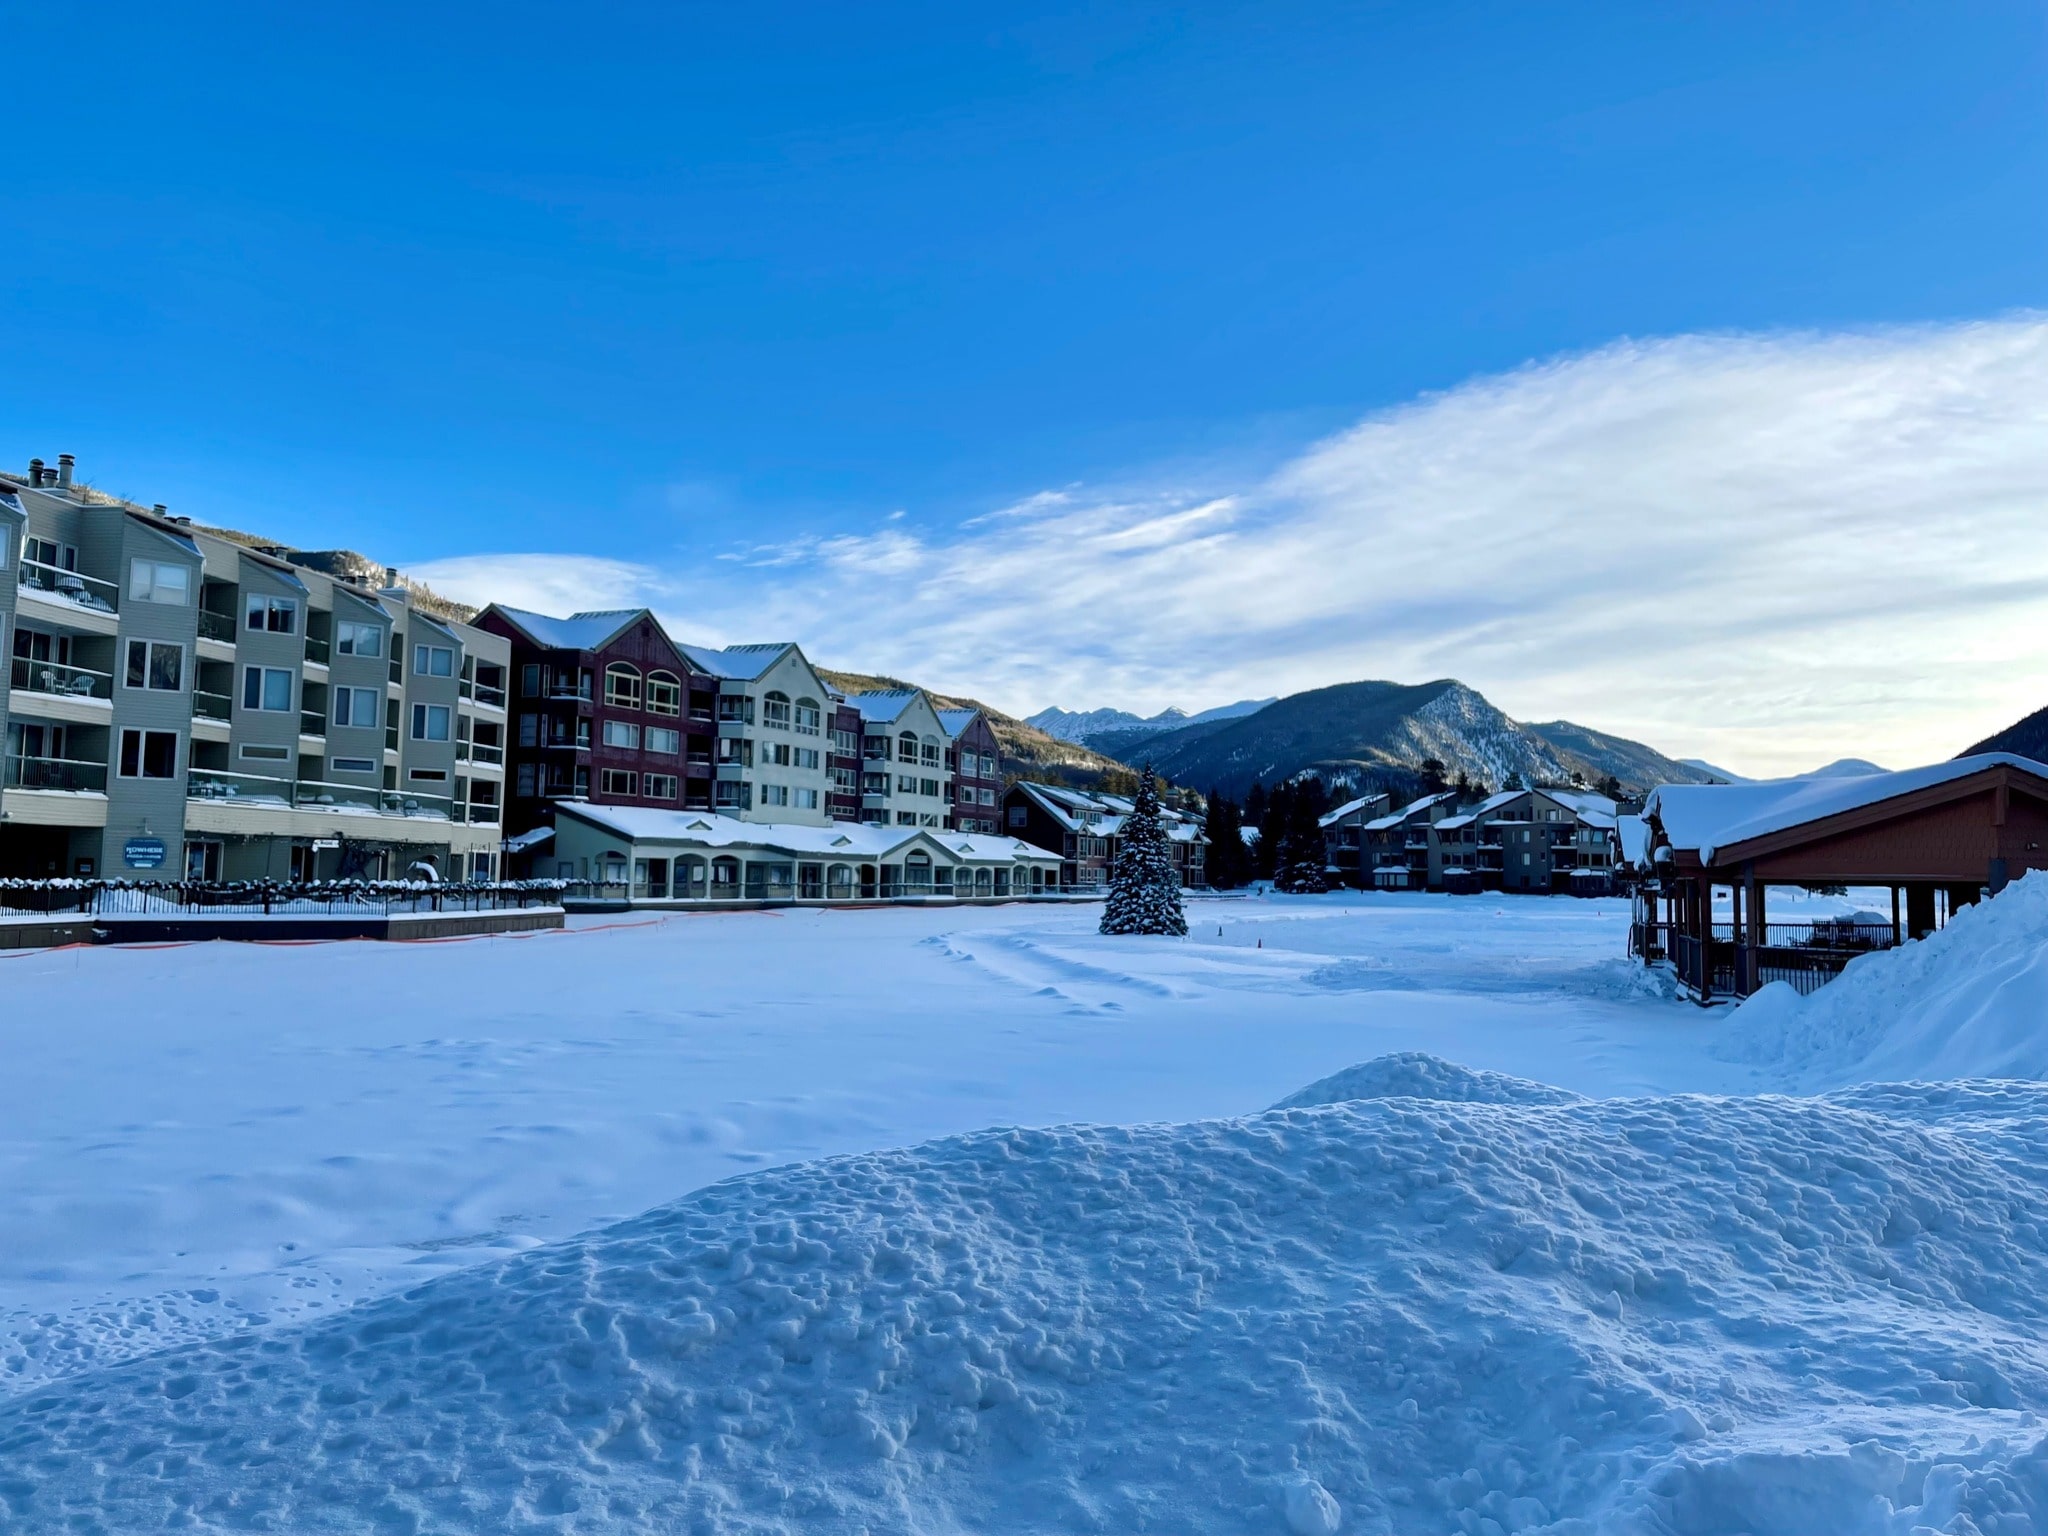 Keystone Could Become Colorado's Newest Town - SnowBrains